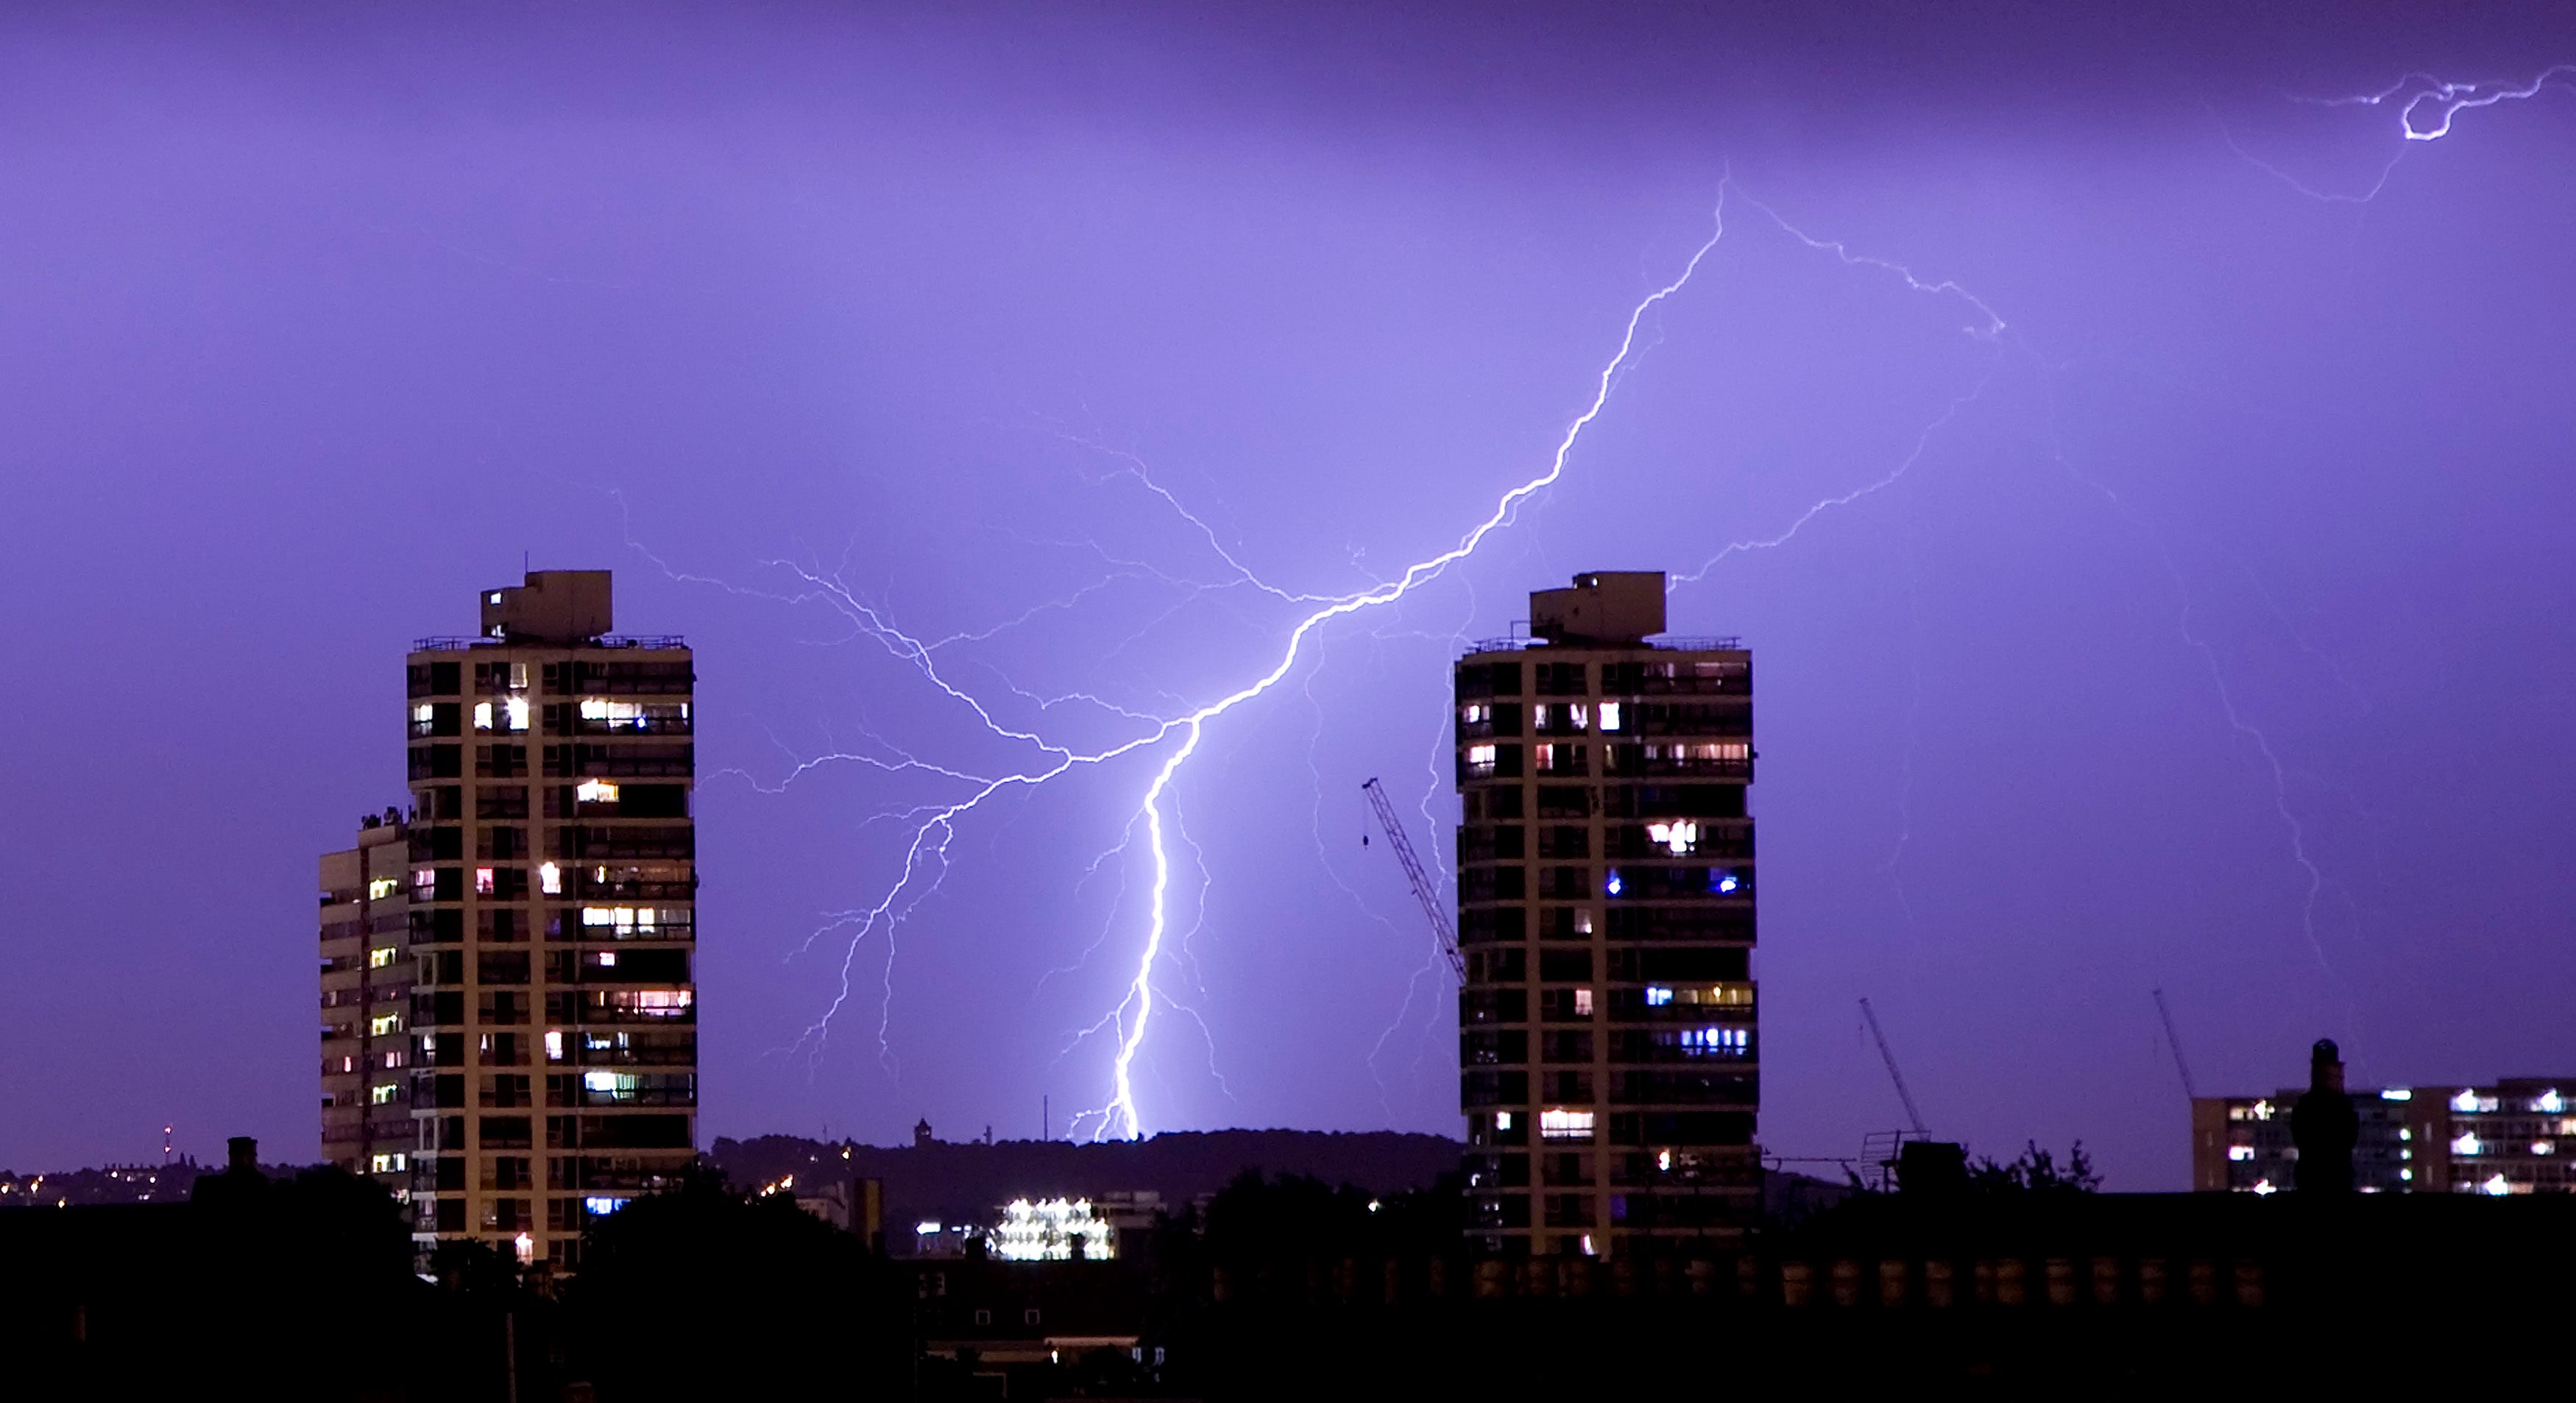 The Met Office has issued a yellow weather warning for thunderstorms for much of the UK. This picture shows a previous storm over south London.